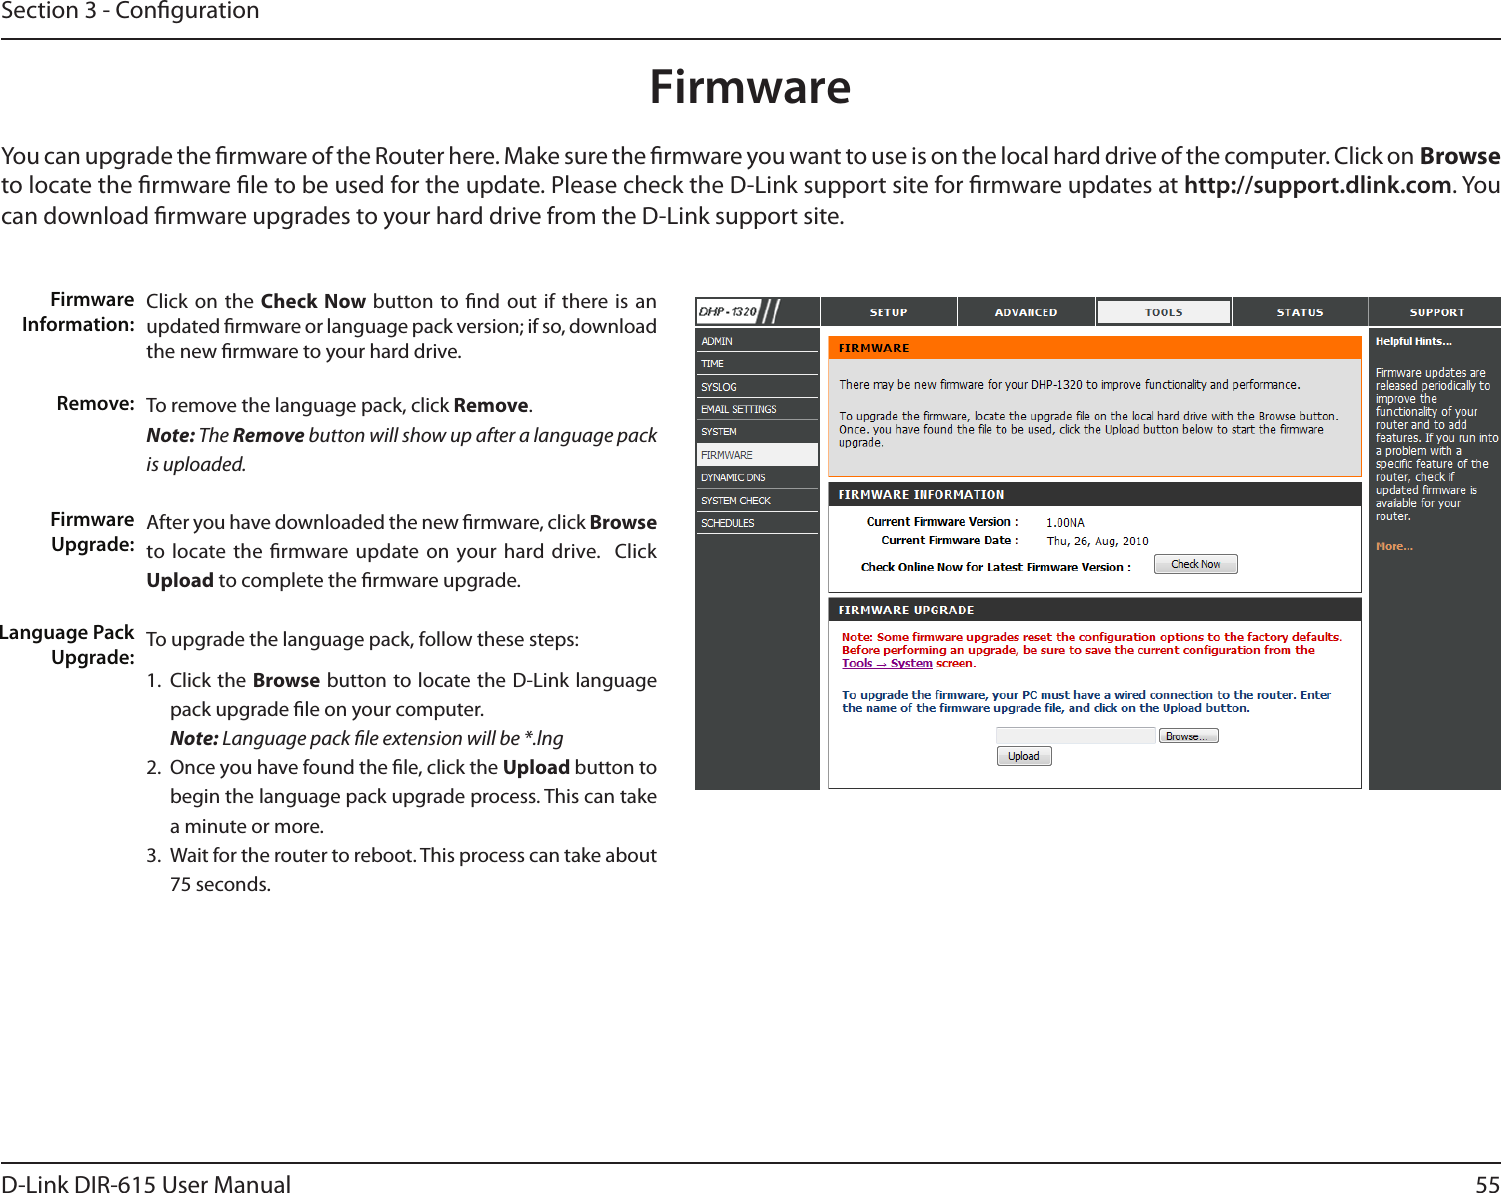 55D-Link DIR-615 User ManualSection 3 - CongurationClick on the Check Now button to nd out if there is an updated rmware or language pack version; if so, download the new rmware to your hard drive.To remove the language pack, click Remove.Note: The Remove button will show up after a language pack is uploaded.After you have downloaded the new rmware, click Browse to locate the  rmware update on  your hard drive.   Click Upload to complete the rmware upgrade.To upgrade the language pack, follow these steps: 1.  Click the Browse  button to locate the D-Link language pack upgrade le on your computer. Note: Language pack le extension will be *.lng2.  Once you have found the le, click the Upload button to begin the language pack upgrade process. This can take a minute or more. 3.  Wait for the router to reboot. This process can take about 75 seconds.Firmware Information:Remove:Firmware Upgrade:Language Pack Upgrade:FirmwareYou can upgrade the rmware of the Router here. Make sure the rmware you want to use is on the local hard drive of the computer. Click on Browse to locate the rmware le to be used for the update. Please check the D-Link support site for rmware updates at http://support.dlink.com. You can download rmware upgrades to your hard drive from the D-Link support site.